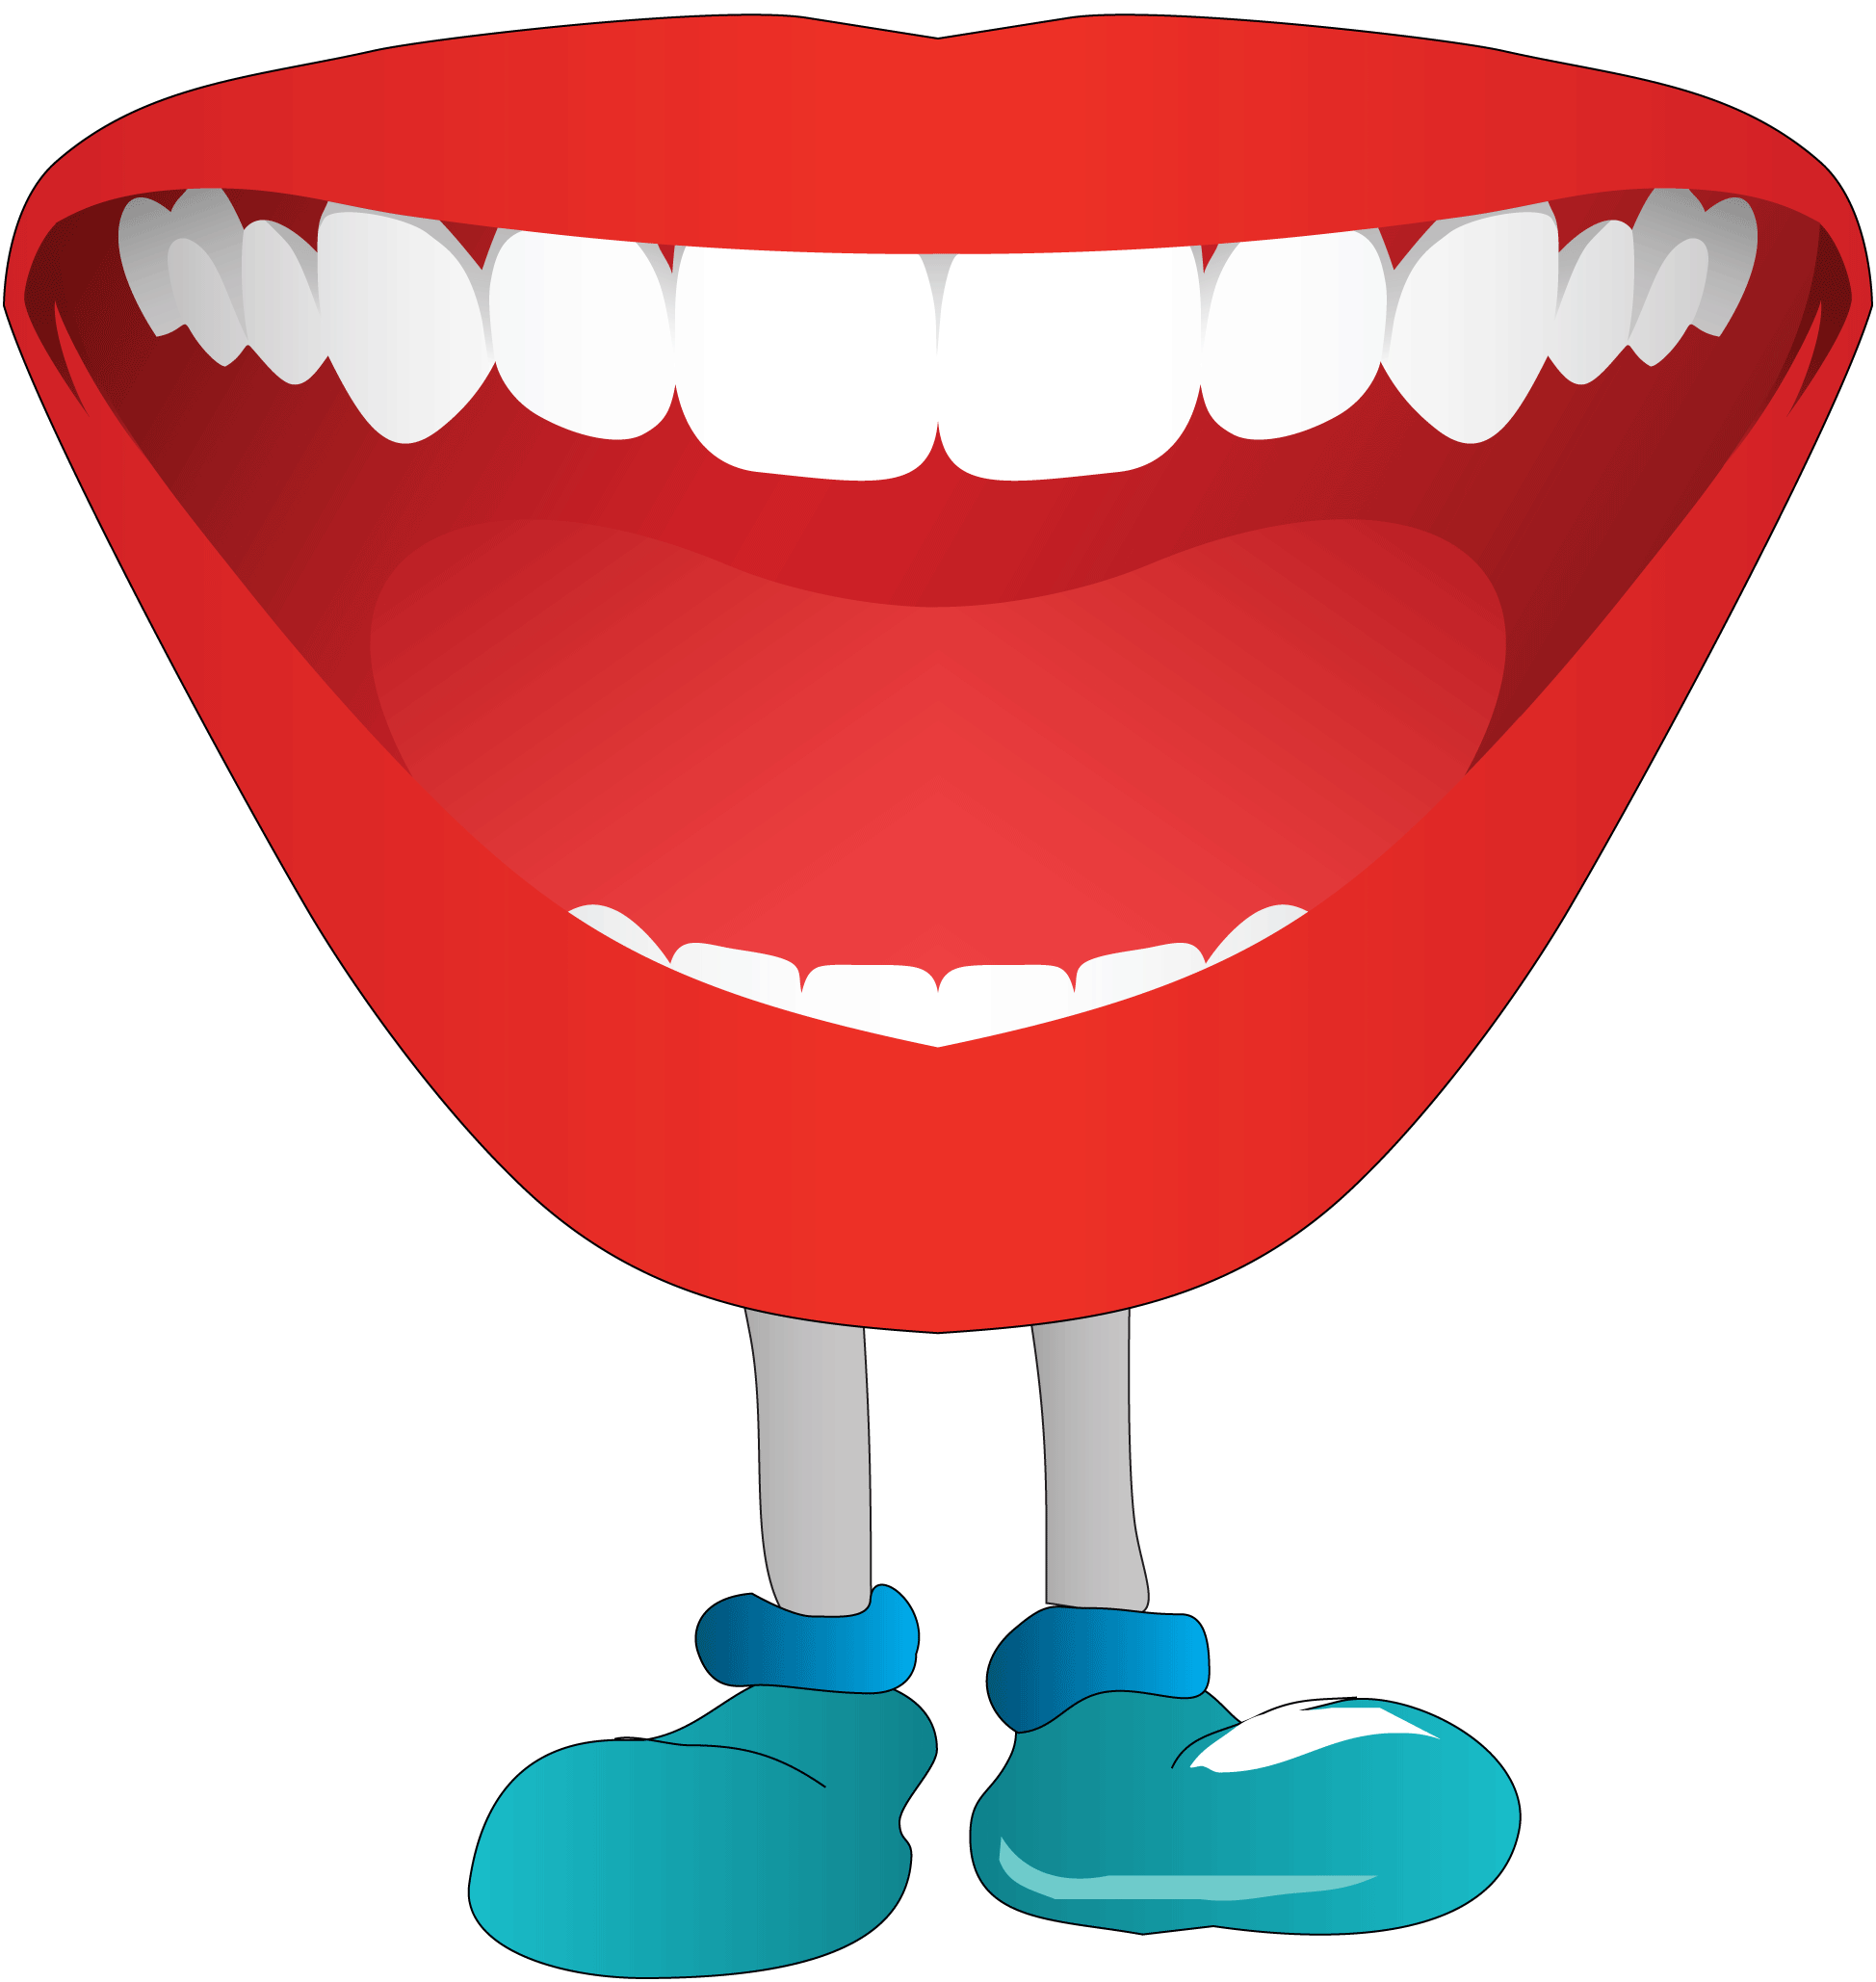 Smile mouth clipart black and